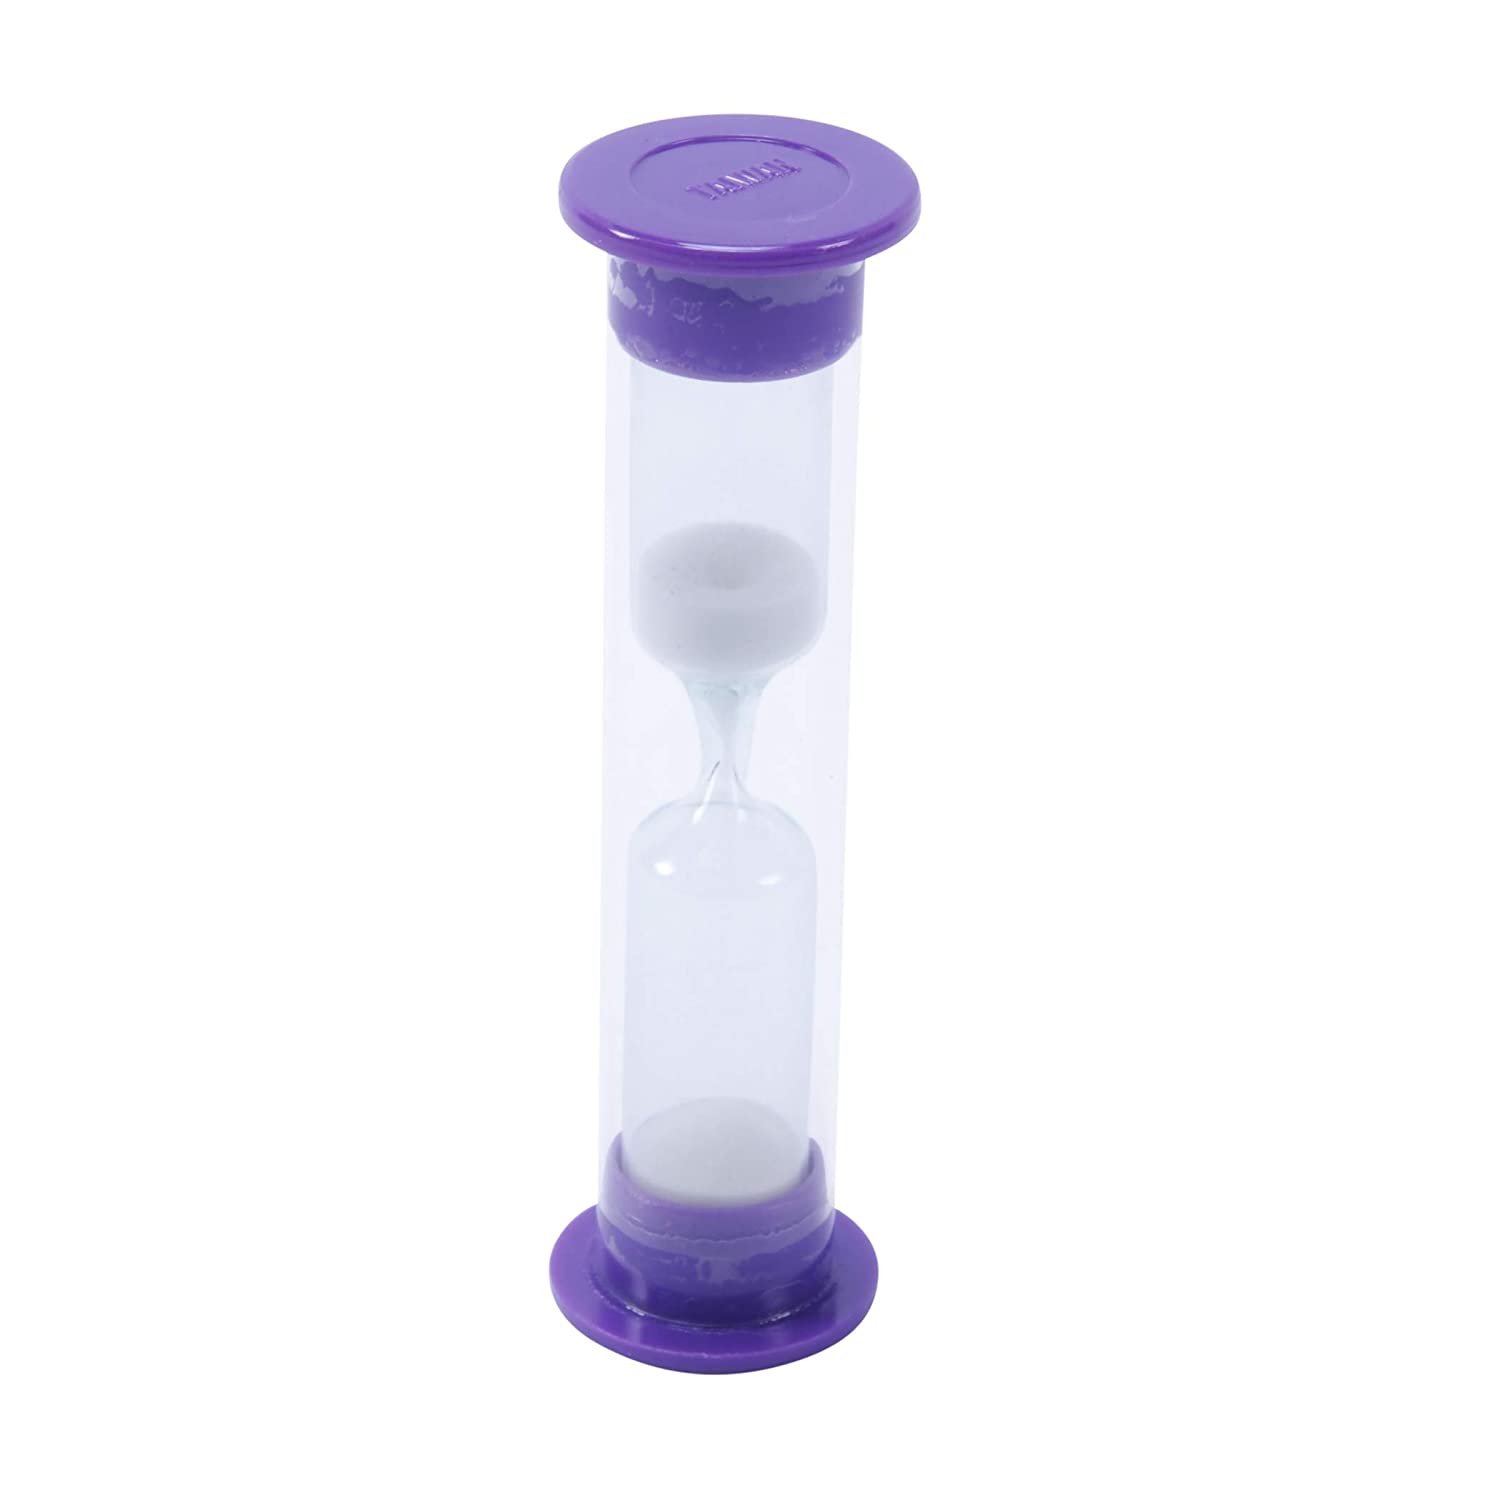 Learning Advantage 3 Minute Sand Timers, Set of 10 - 7626